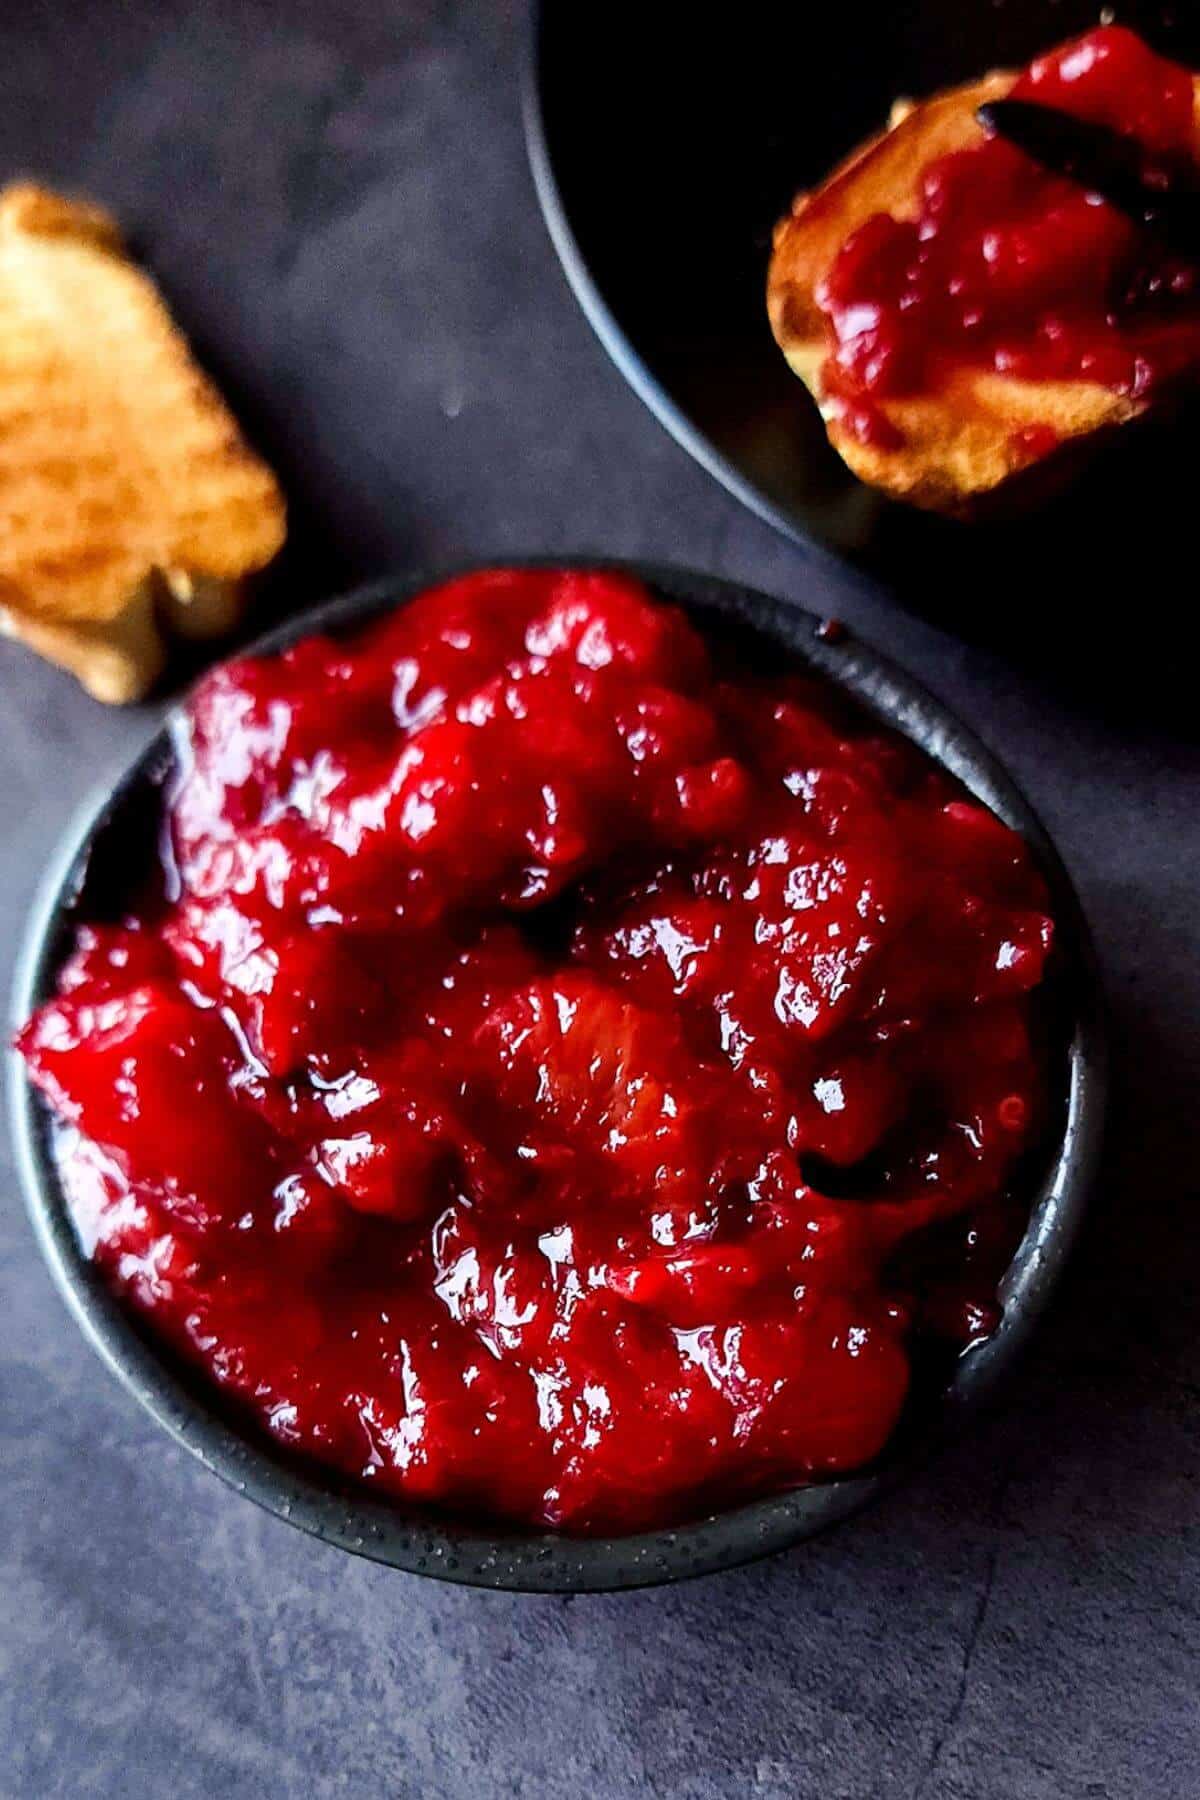 Plum chutney in a black bowl with toasted bread in the background.